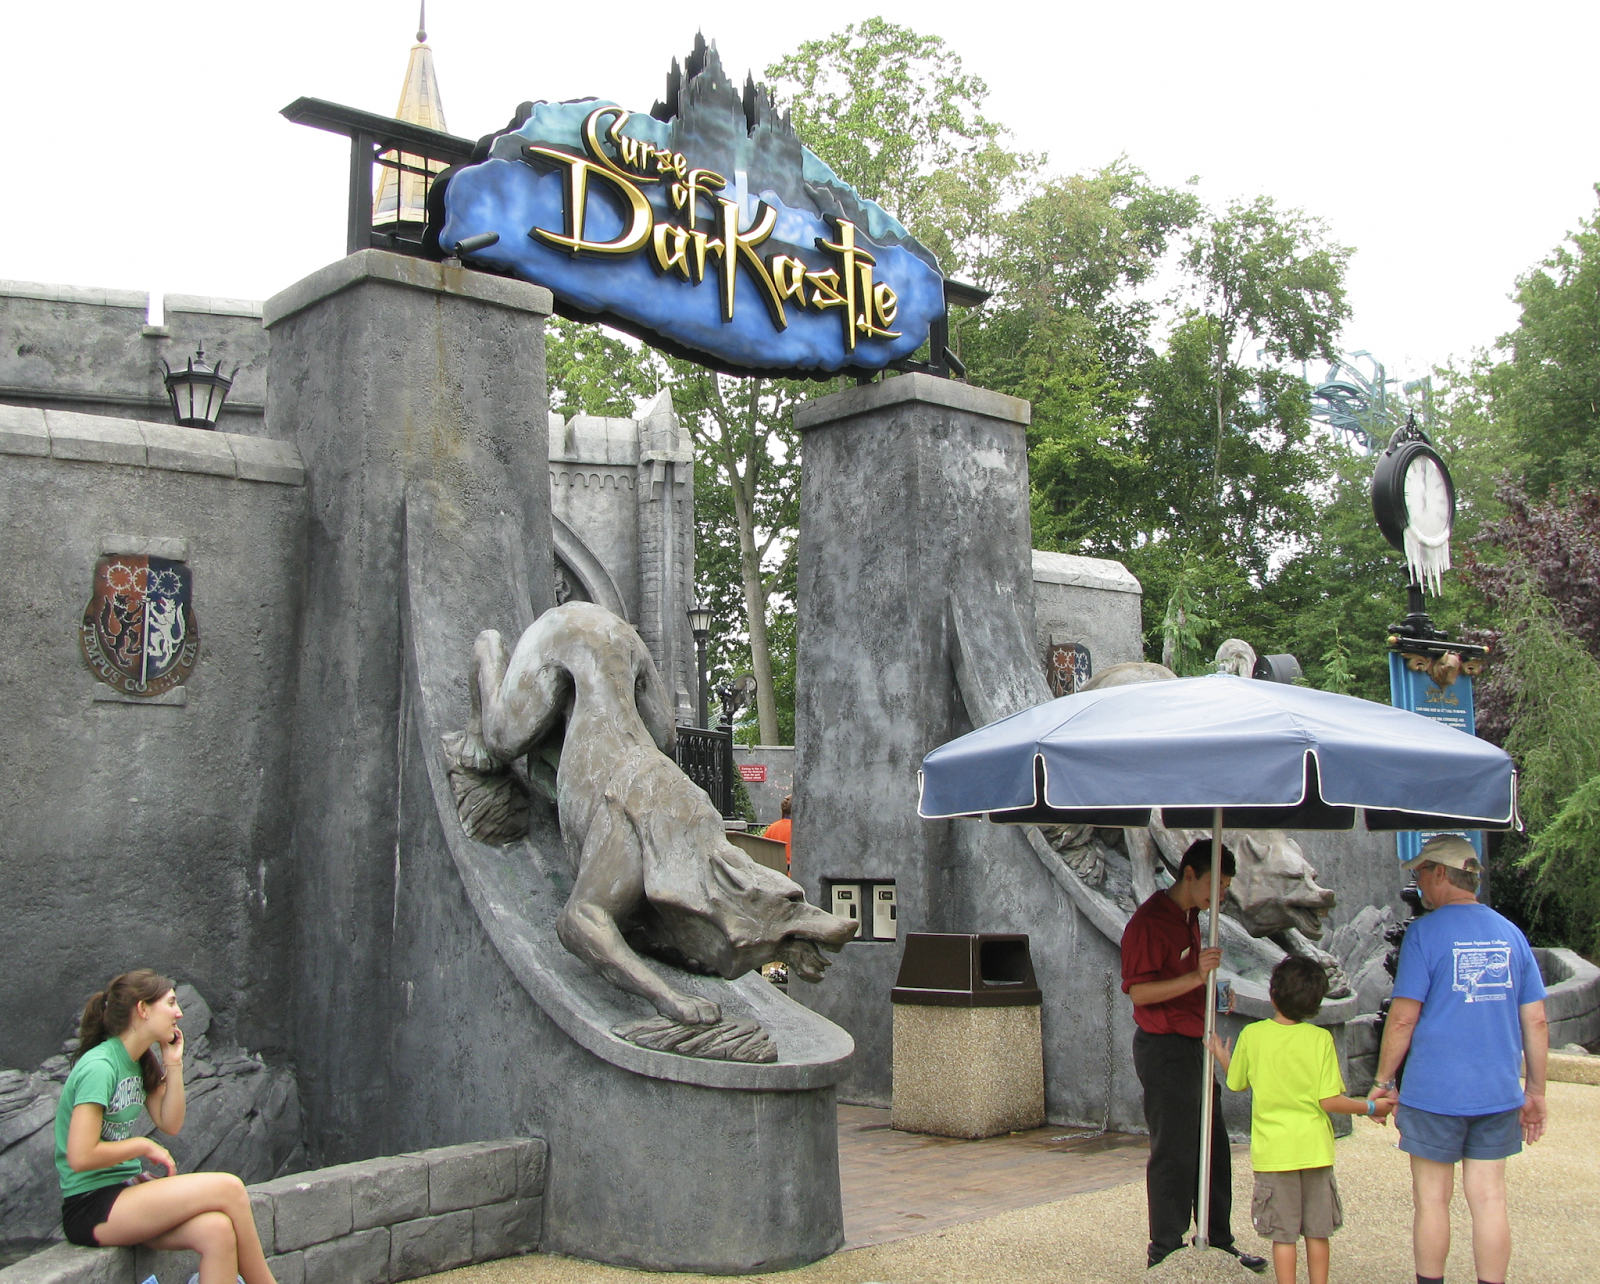 Newsplusnotes Curse Of Darkastle Has Closed For Good At Busch